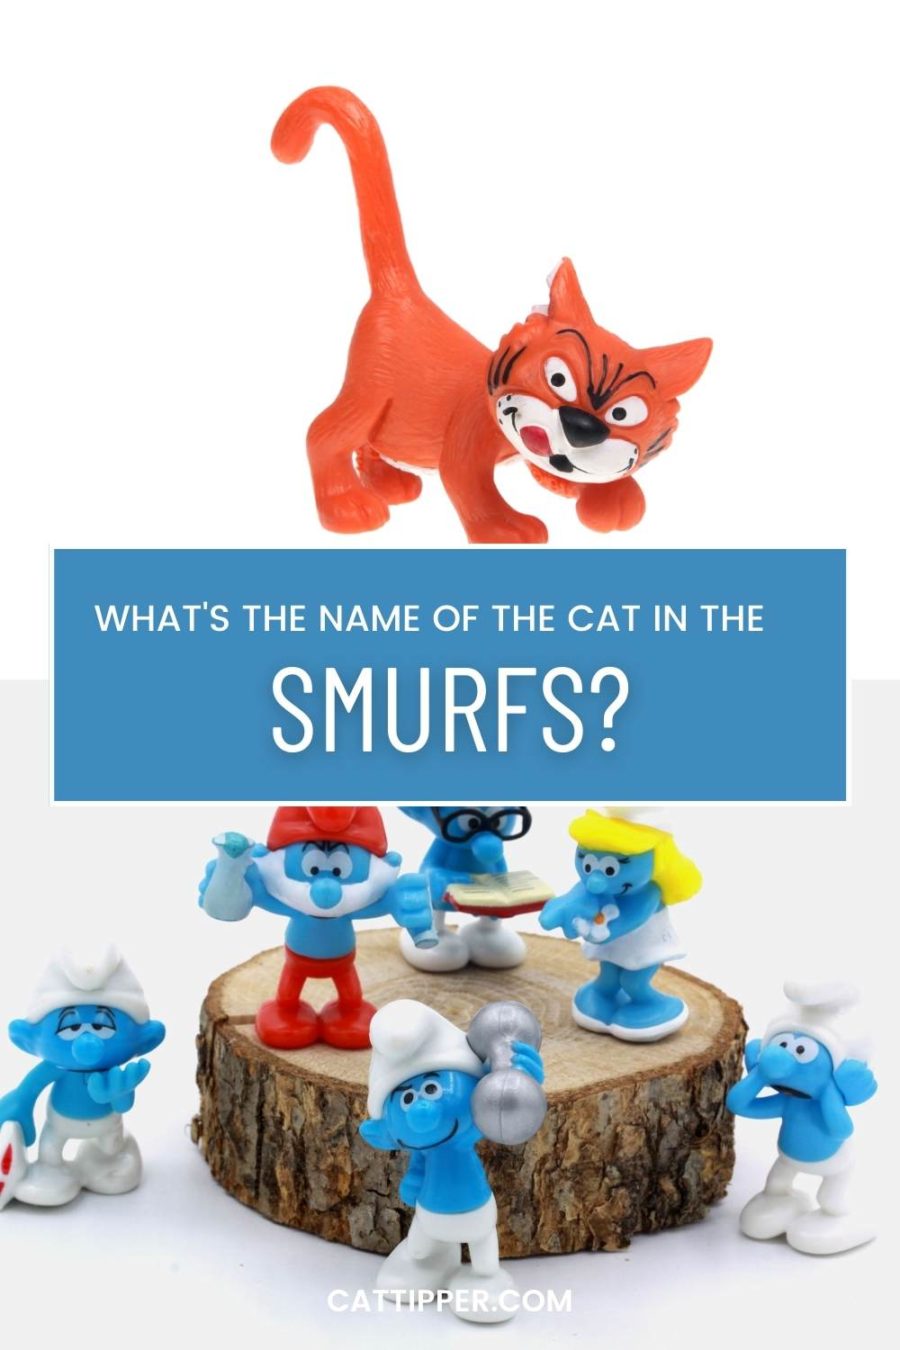 image of cat figurine from the Smurfs cartoon show and an image of Smurf figurines